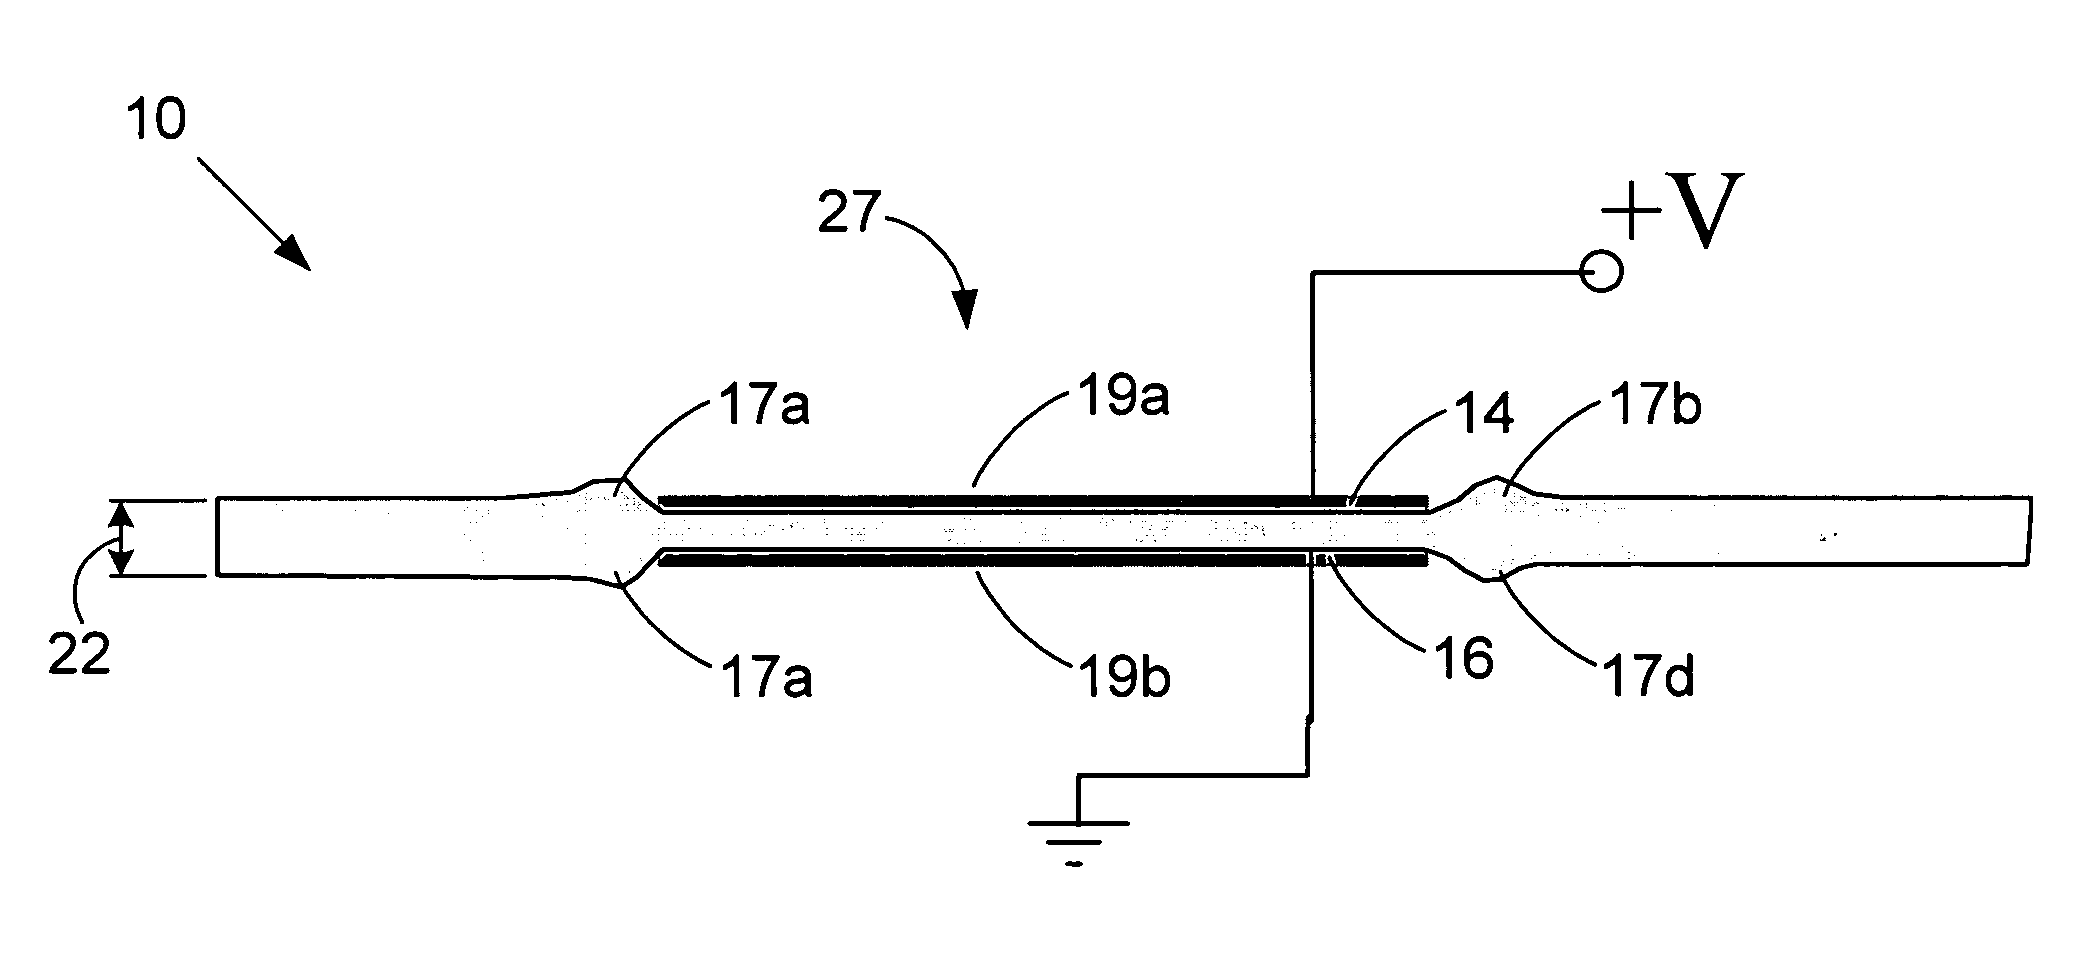 Surface deformation electroactive polymer transducers